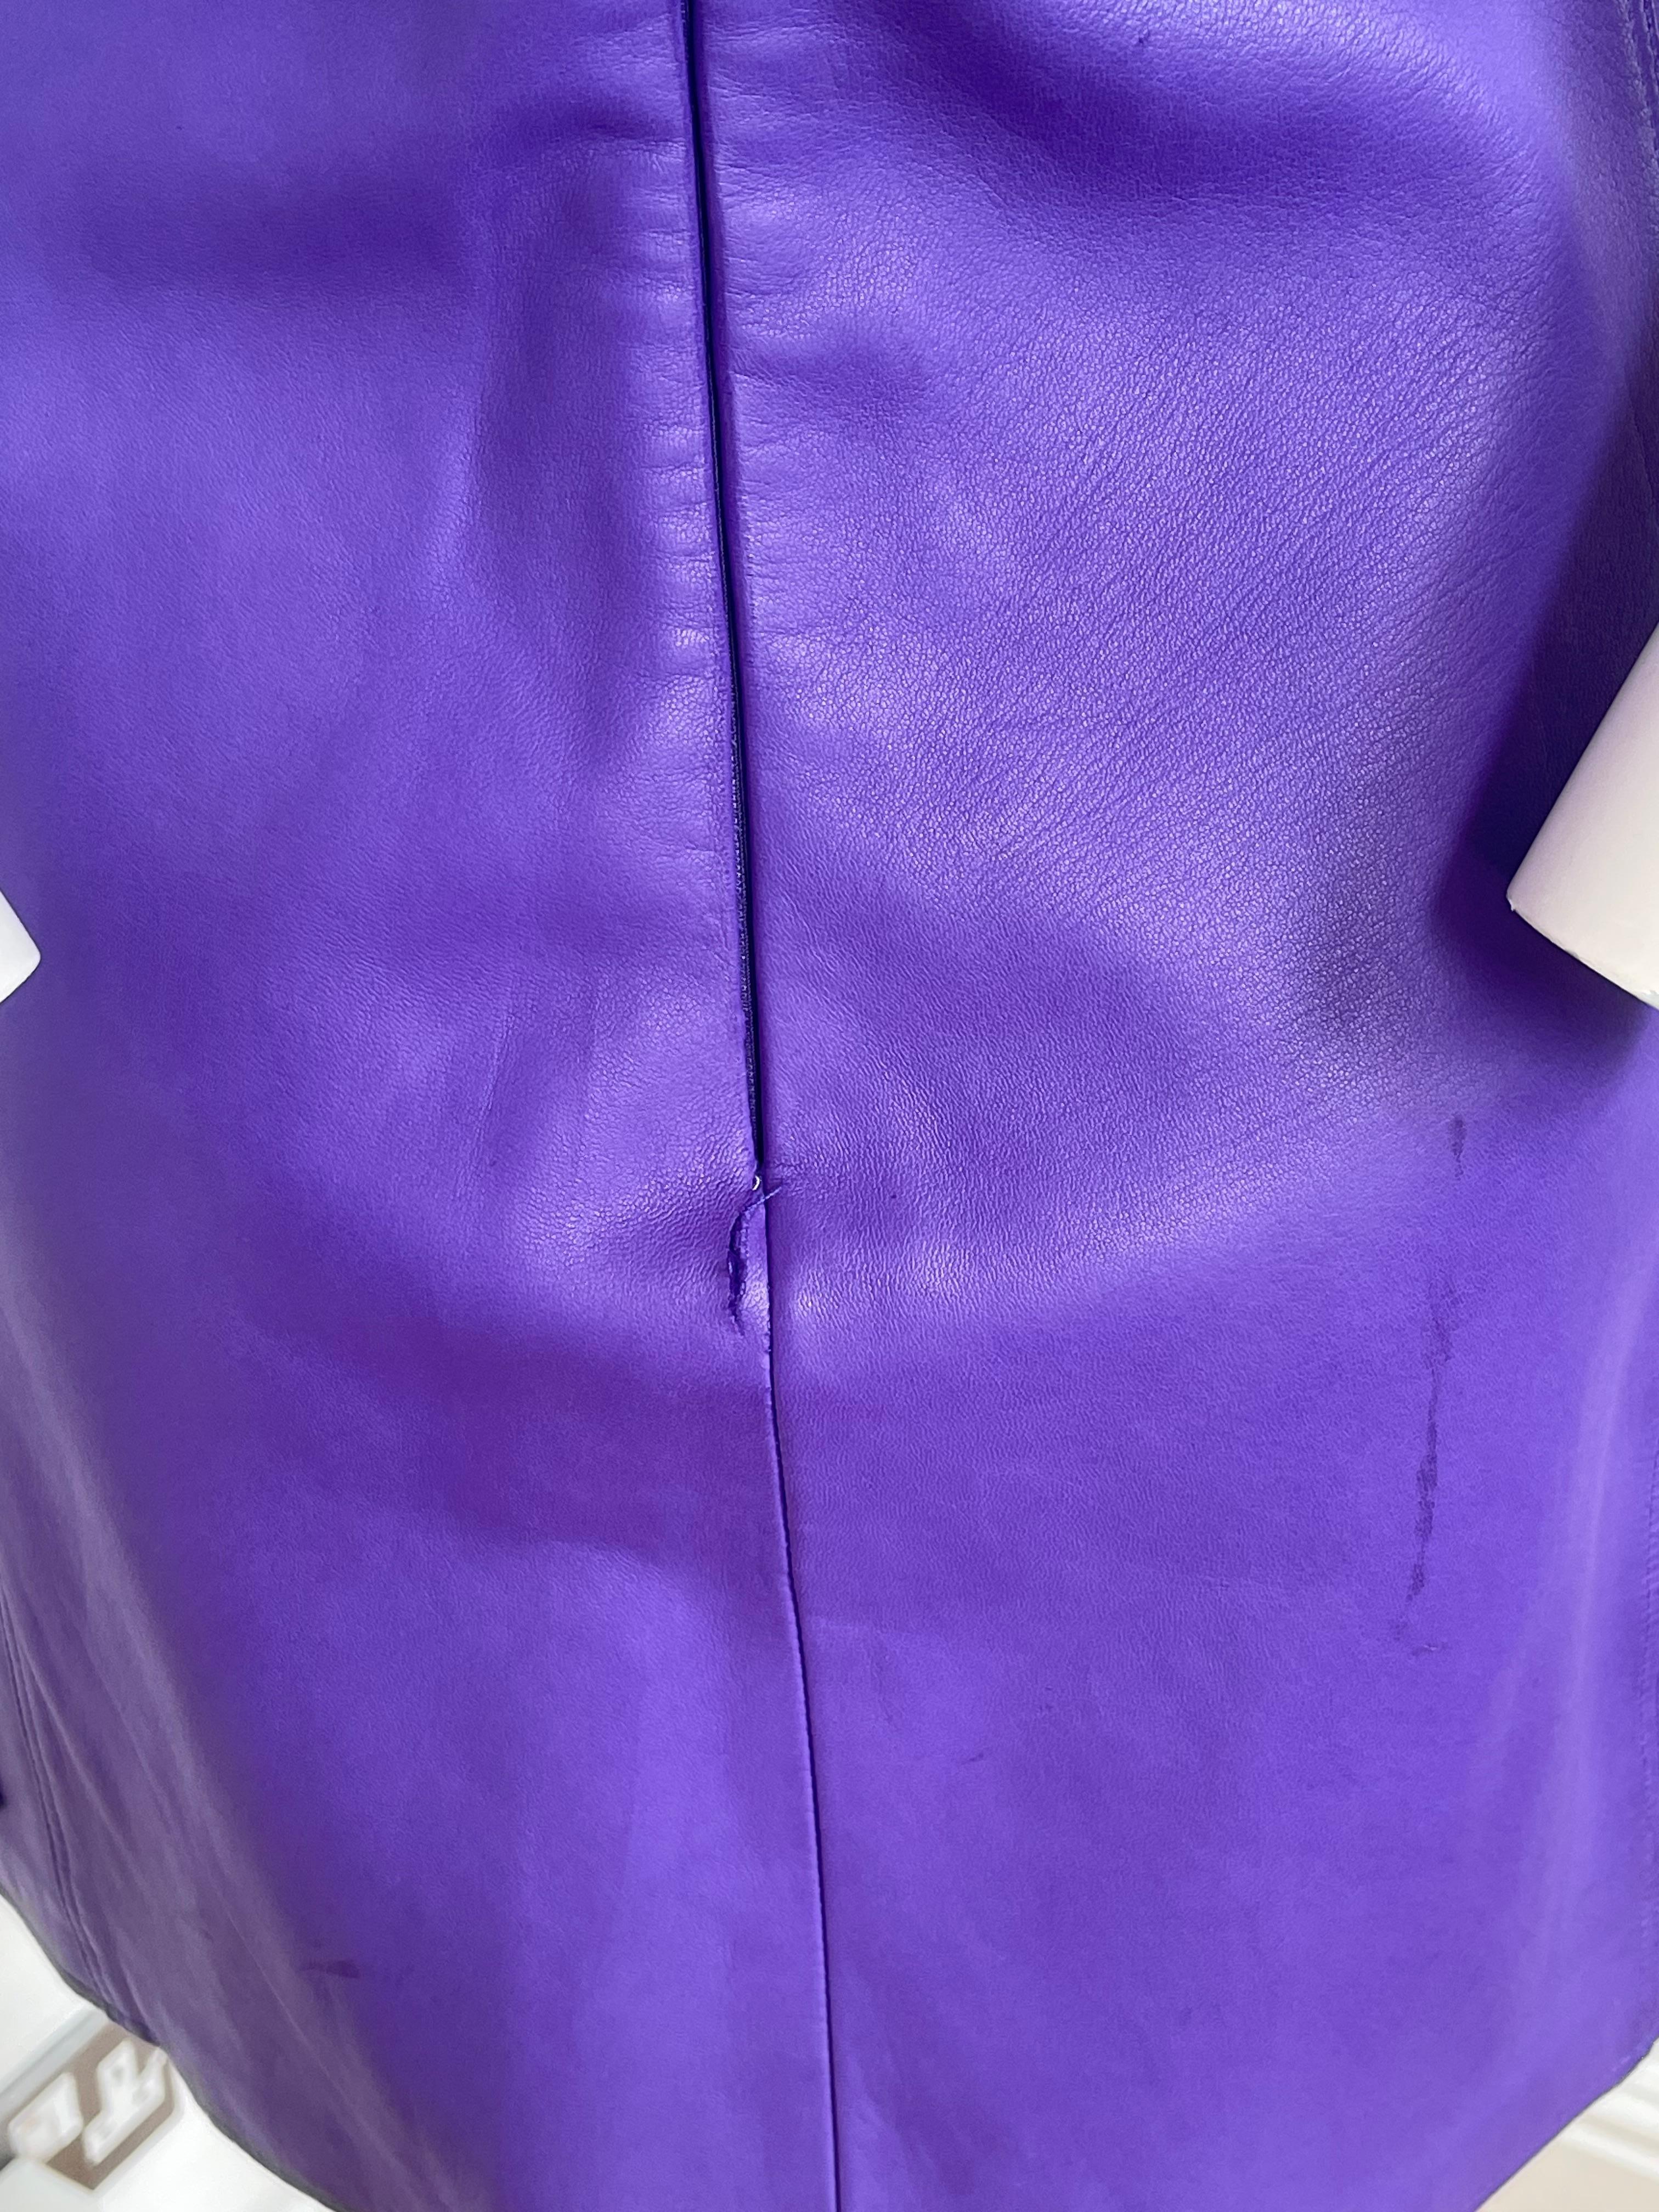 FW 1996 Versace purple leather shift dress with medusa buttons For Sale 4